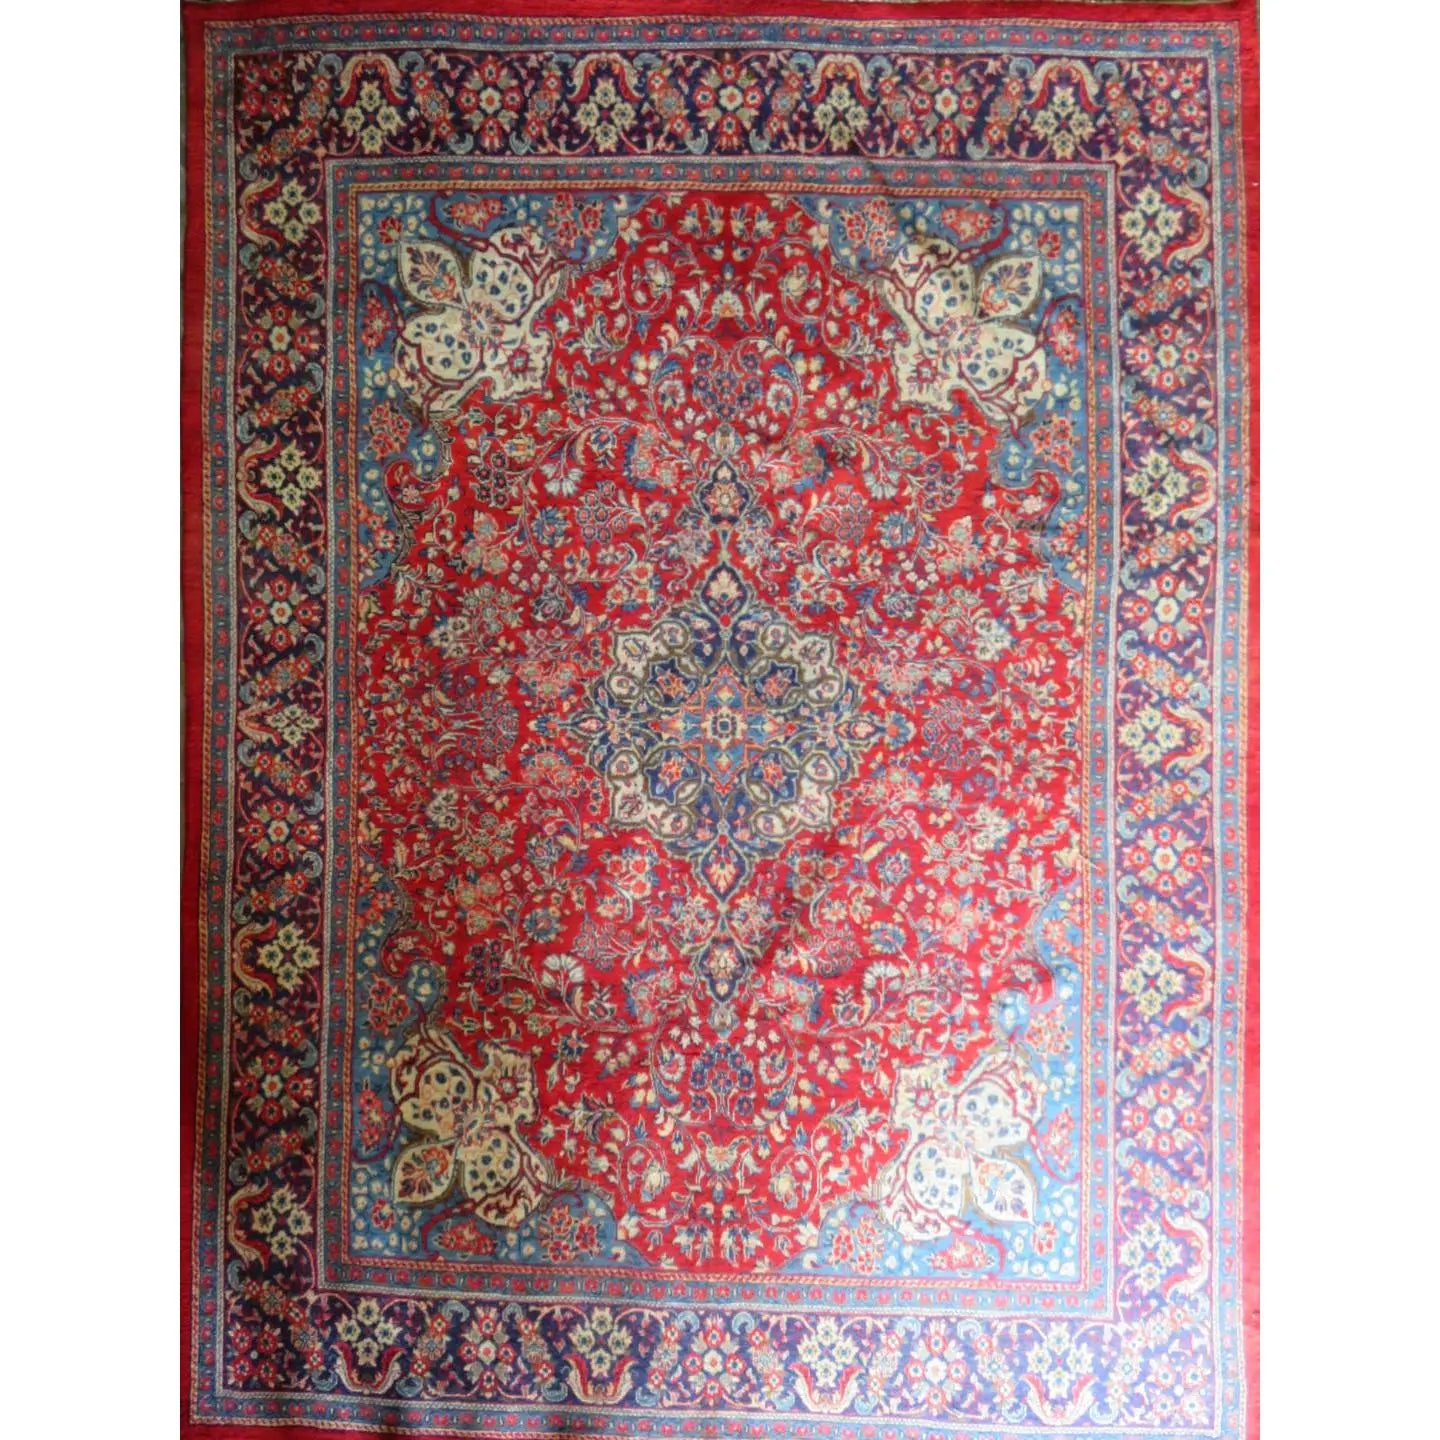 Hand-Knotted Persian Wool Rug _ Luxurious Vintage Design, 13'4" x 10'0", Artisan Crafted